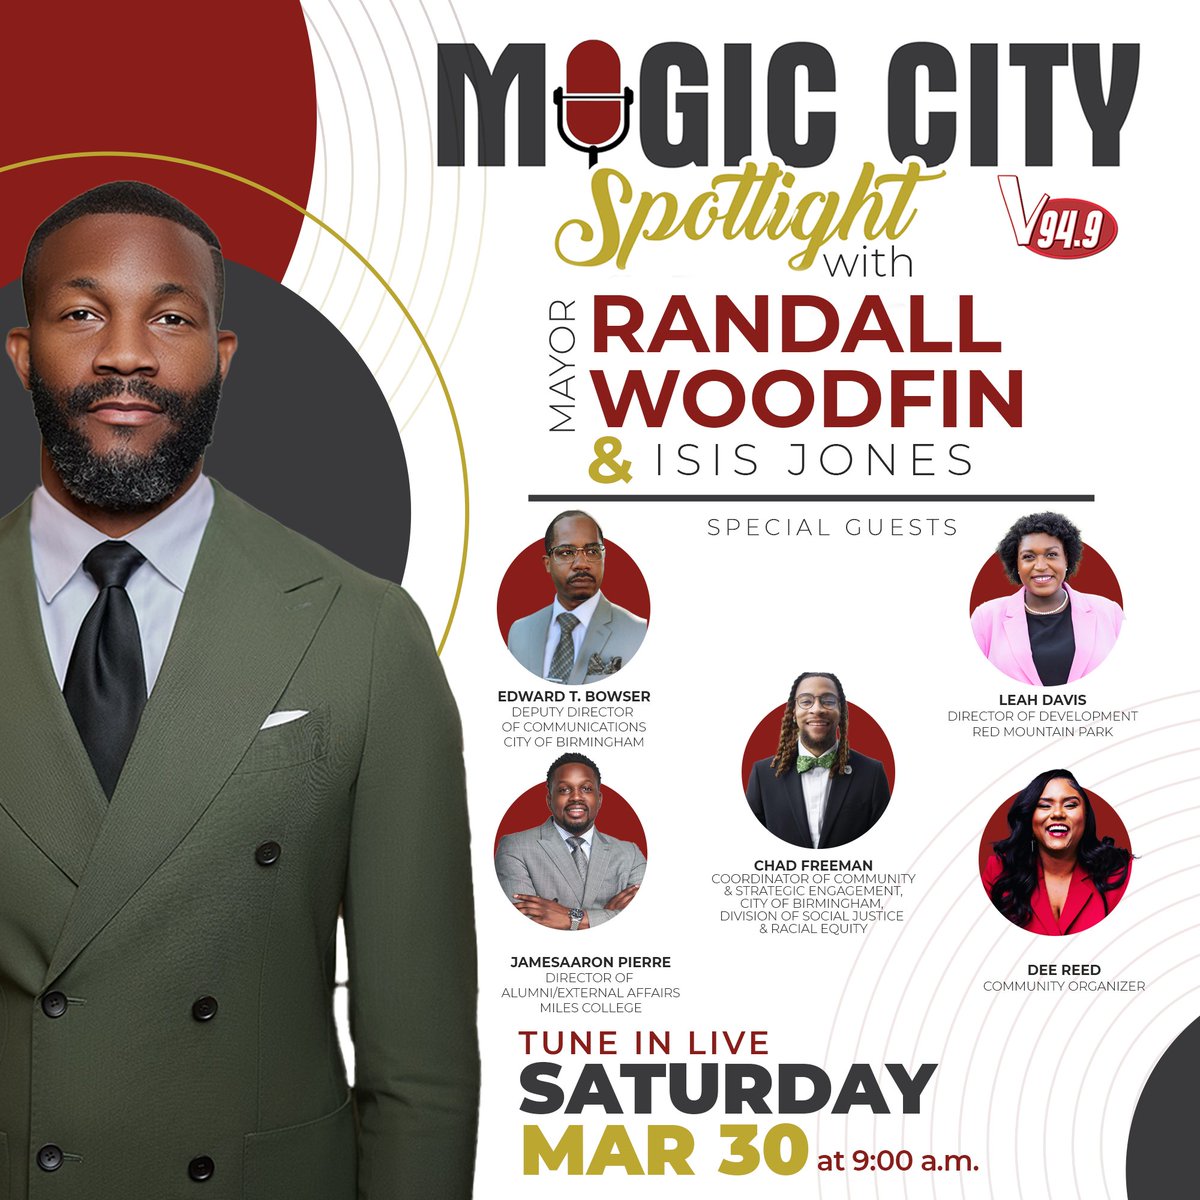 Birmingham has lots of new leaders on the rise, and this Saturday you'll get to hear from them. Tune in to the Magic City Spotlight at 9 a.m. and get to know five dynamic leaders who are bringing change to our city. We'll see you on V94.9.